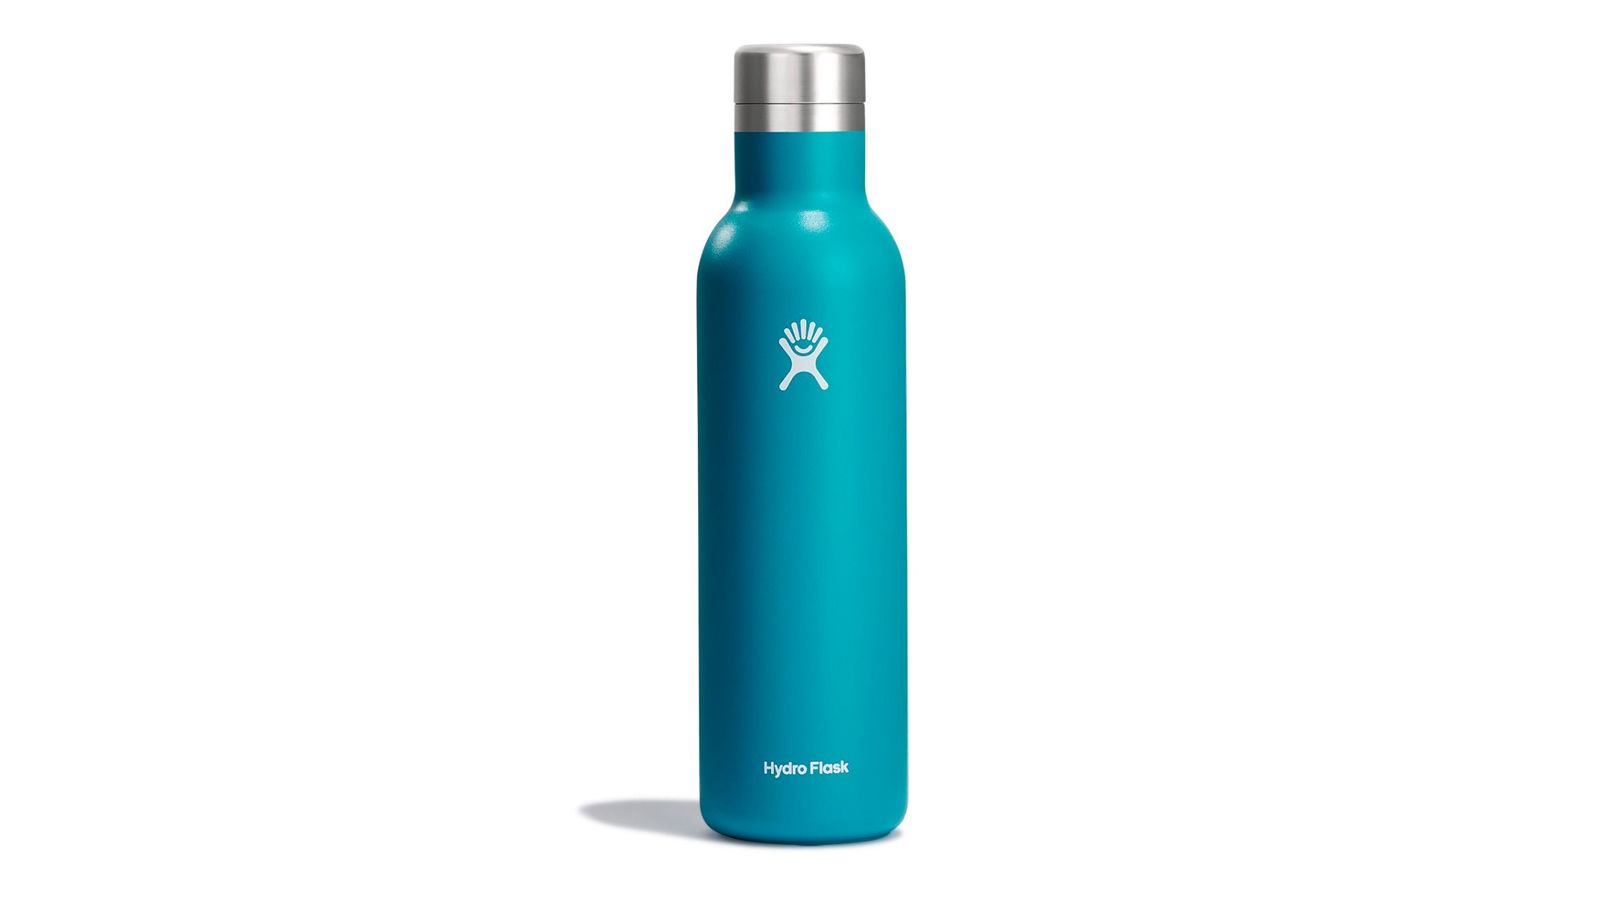 The Hydro Flask Tumbler Is on Sale for Cyber Monday